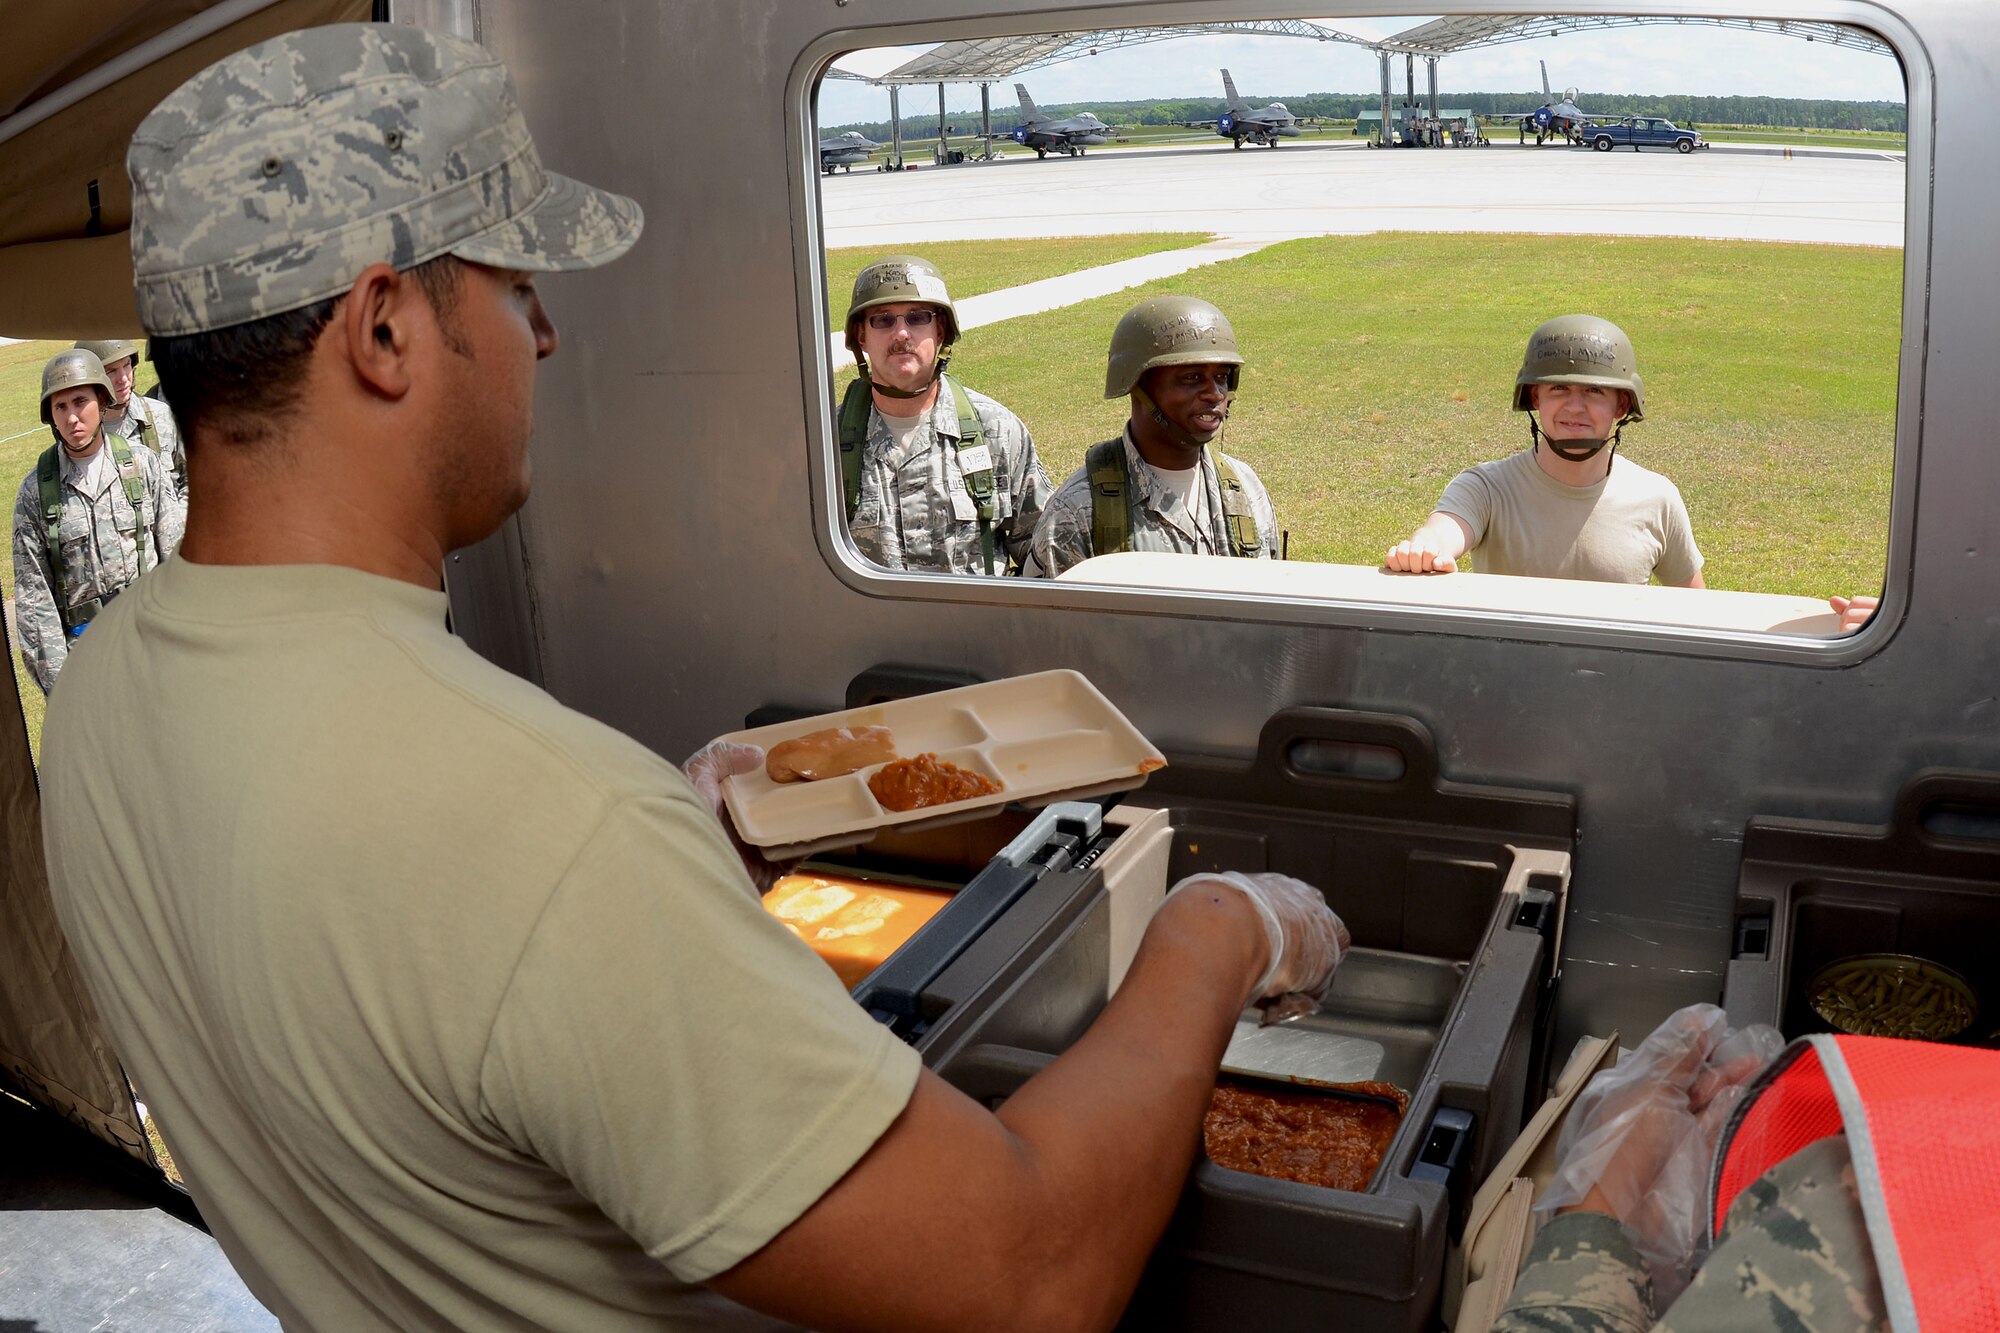 U.S. Air Force Airman 1st Class Luis Sanchez, a services specialist with the 169th Services Flight at McEntire Joint National Guard Base, South Carolina Air National Guard, serves food from the Single Palletized Expeditionary Kitchen during the June Unit Training Assembly Readiness Exercise, June 1, 2013. The SPEK is set up for flight line personnel, who can't afford the time to travel to the base dining facility, to have quick access to a hot meal. Members of the 169th Fighter Wing are preparing for a Certified Readiness Evaluation, which evaluates a unit's ability to process personnel and equipment from home station to a deployed location safely and efficiently, then operate and launch missions in a chemical combat environment.
(U.S. Air National Guard photo by Tech. Sgt. Caycee Watson/Released)